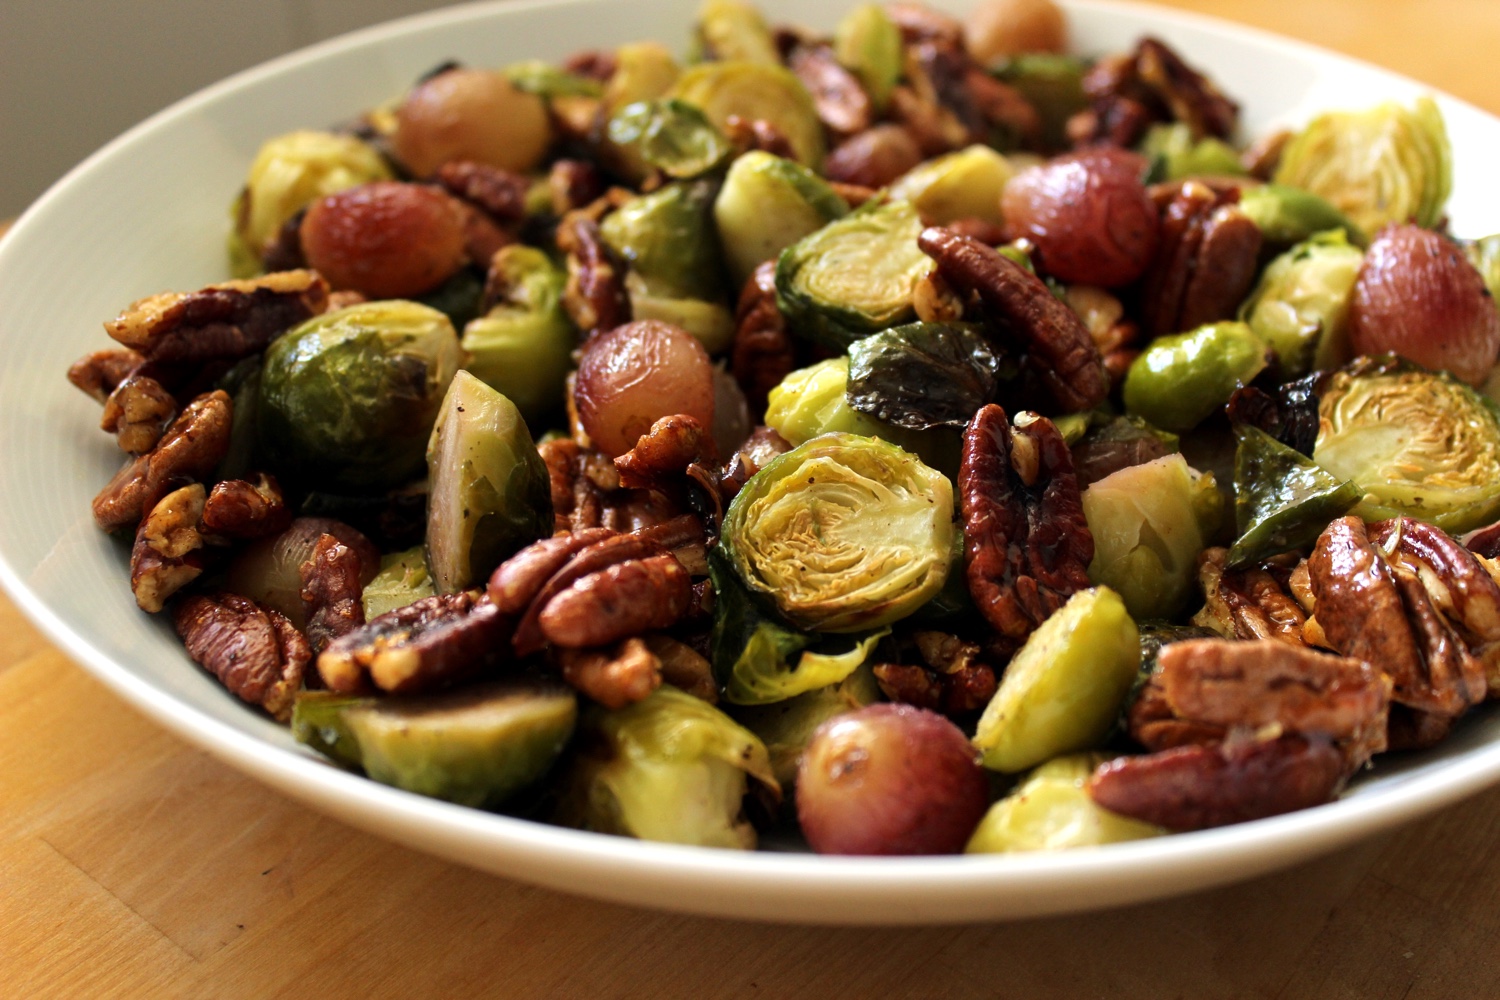 roasted_brussels_sprouts_with_red_grapes_and_maple_pecans.jpg